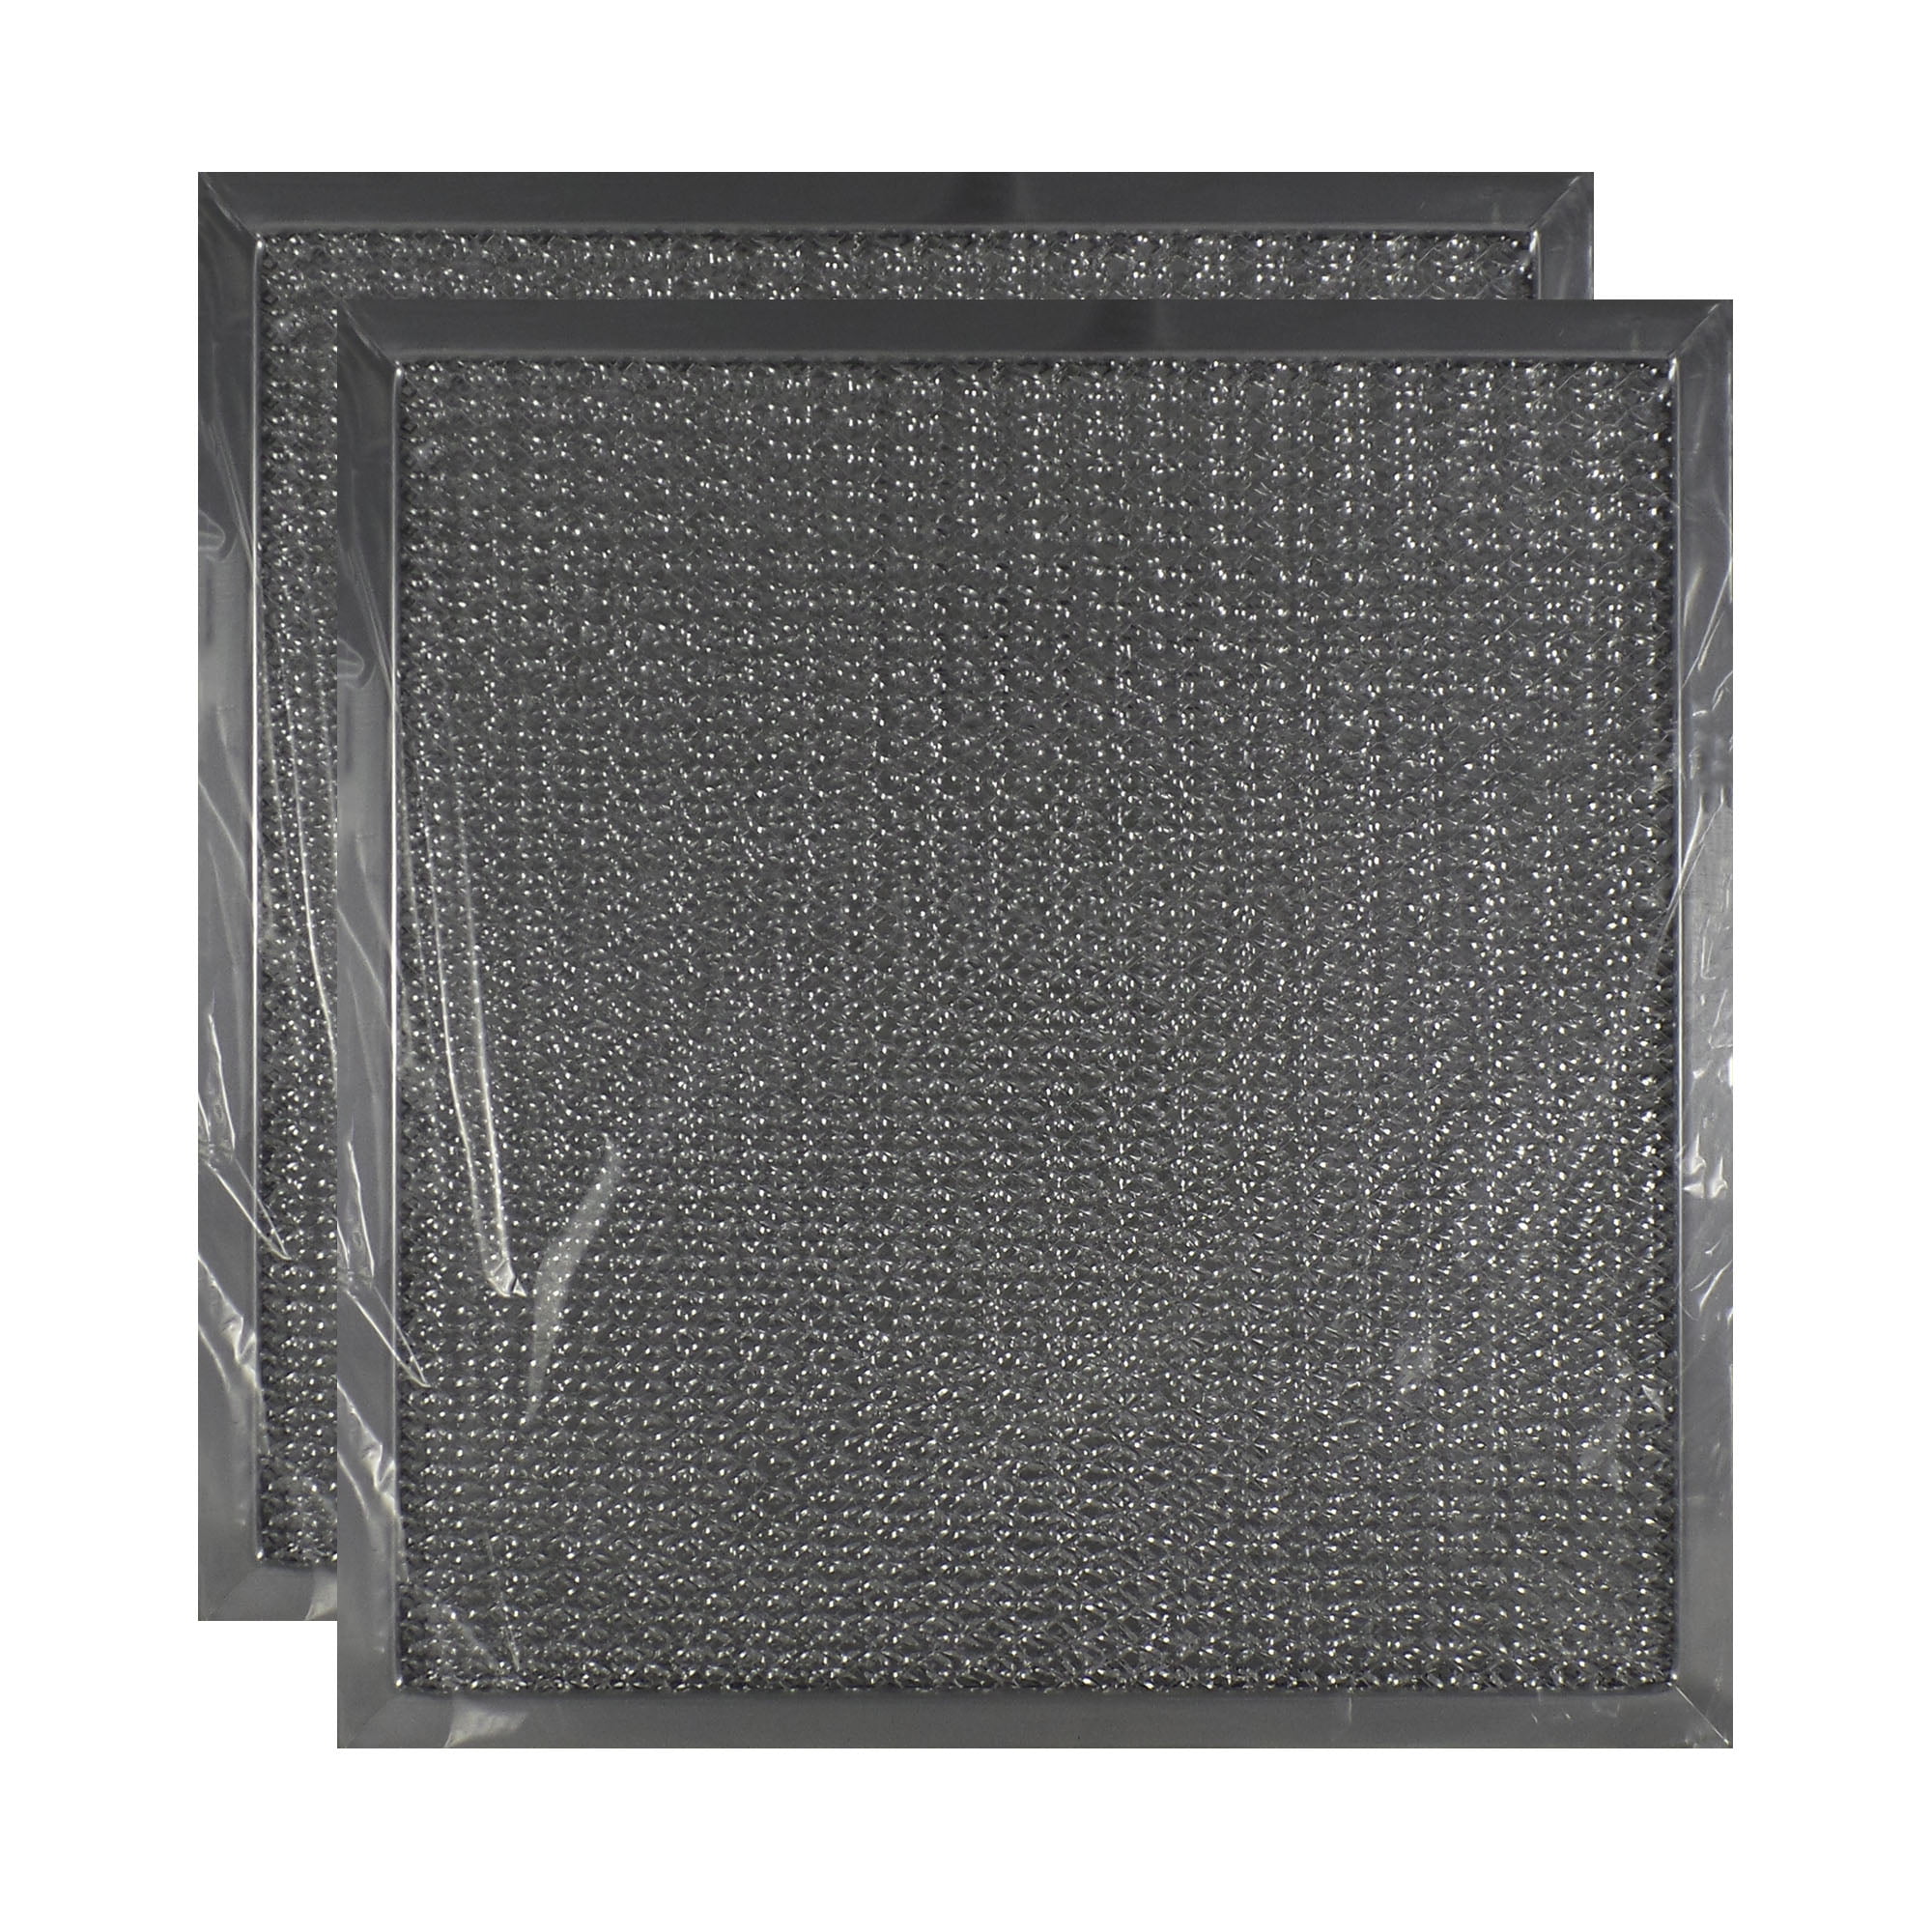 2 PACK WB02X10707 GE Range Hood Charcoal Carbon Filter Replacements 